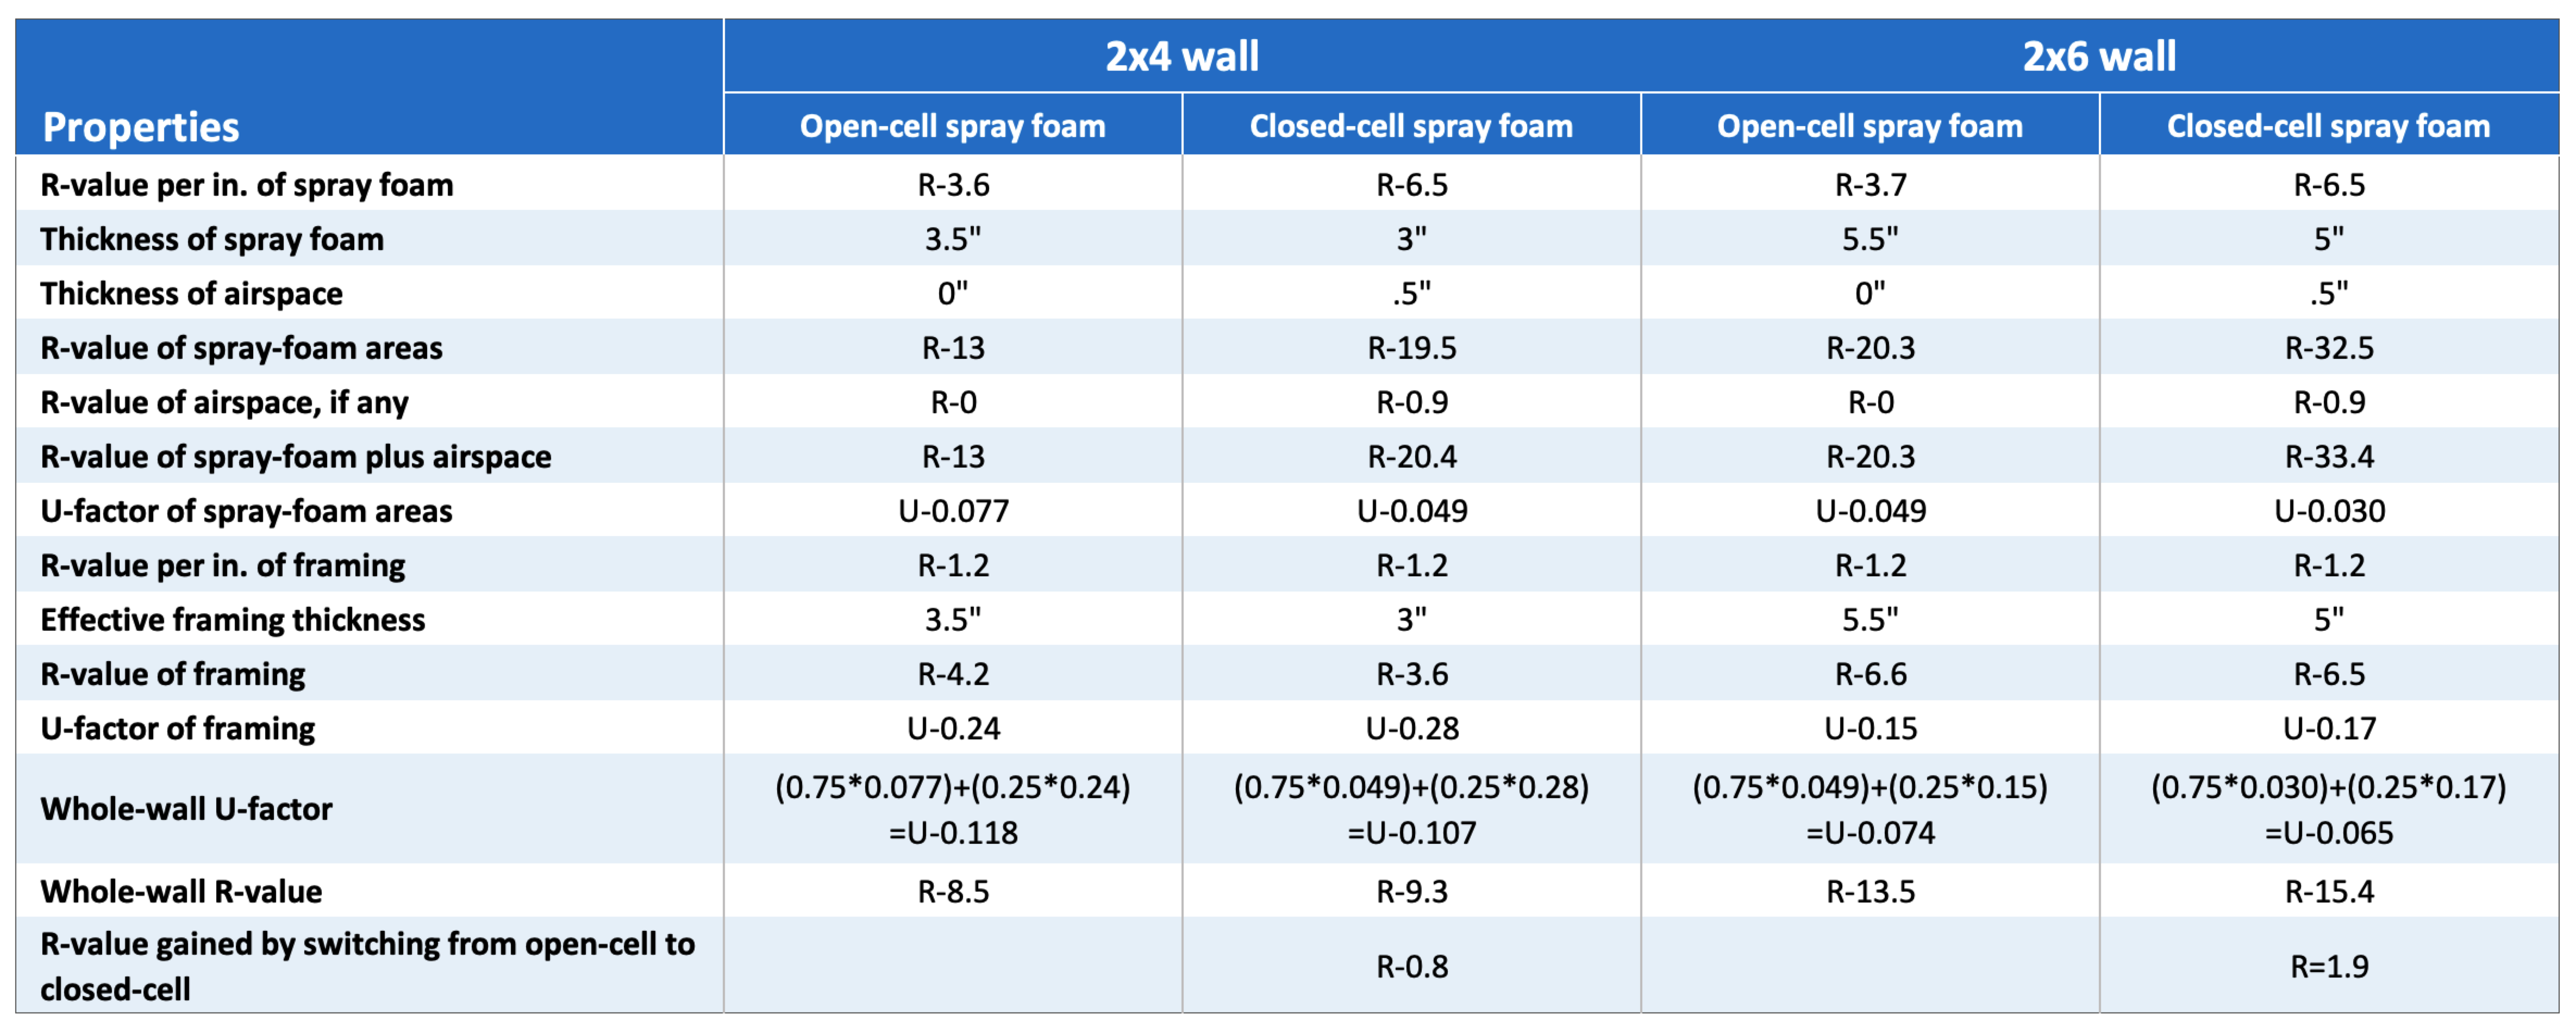 Table showing R-value and U-factor comparisons of open-cell and closed-cell spray foam on different sized walls.